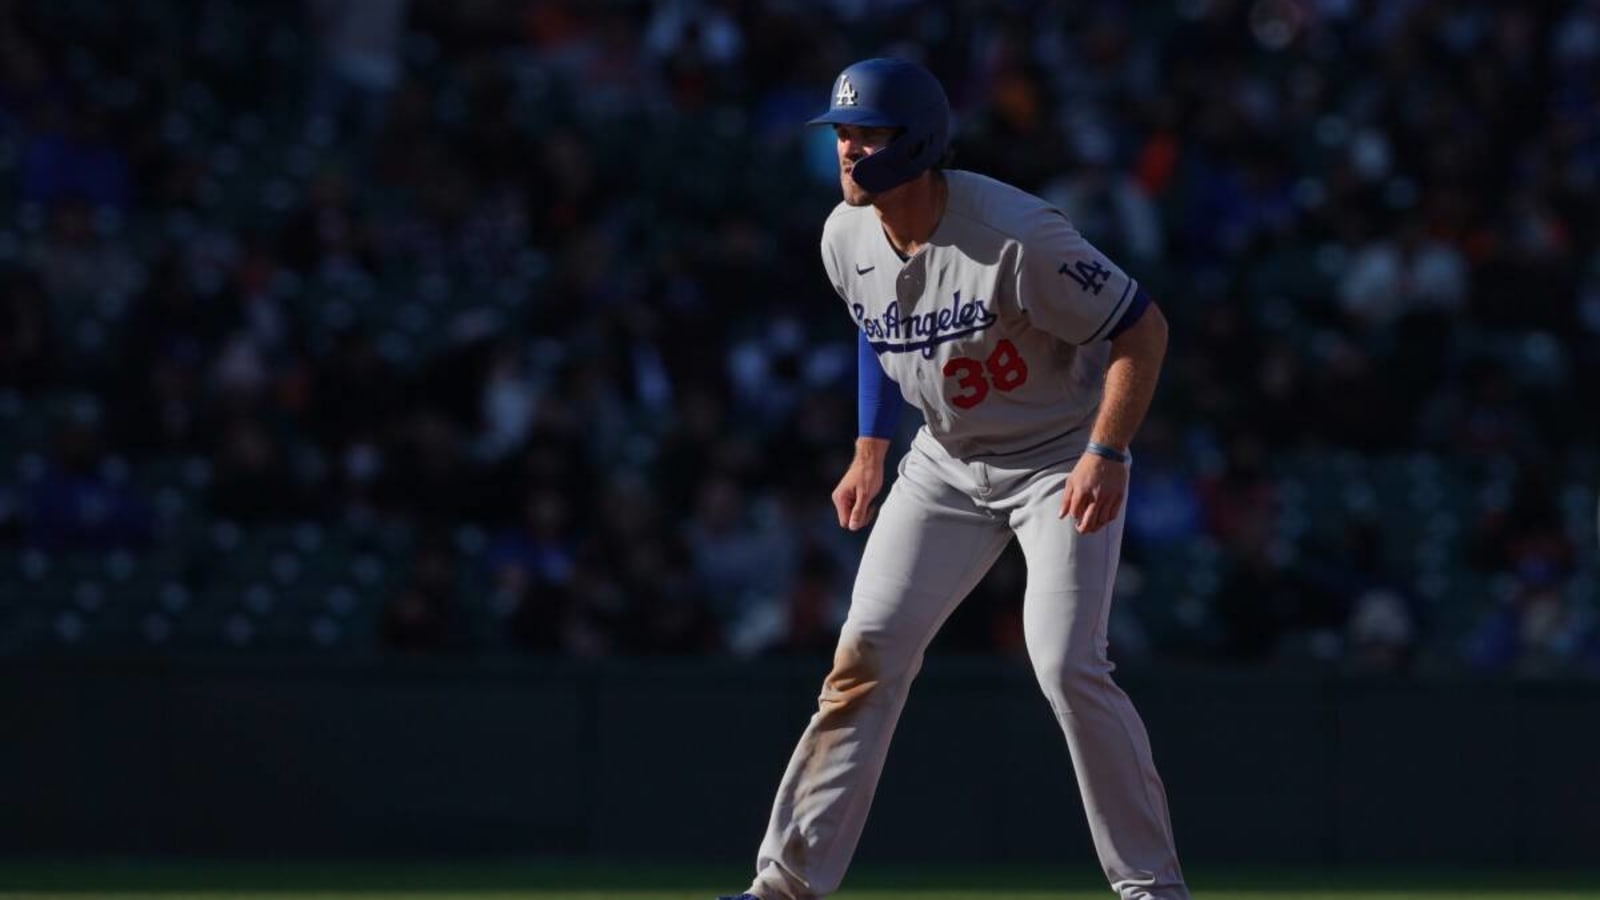 Former Dodgers Top Outfield Prospect Signs With Texas Rangers as Pitcher